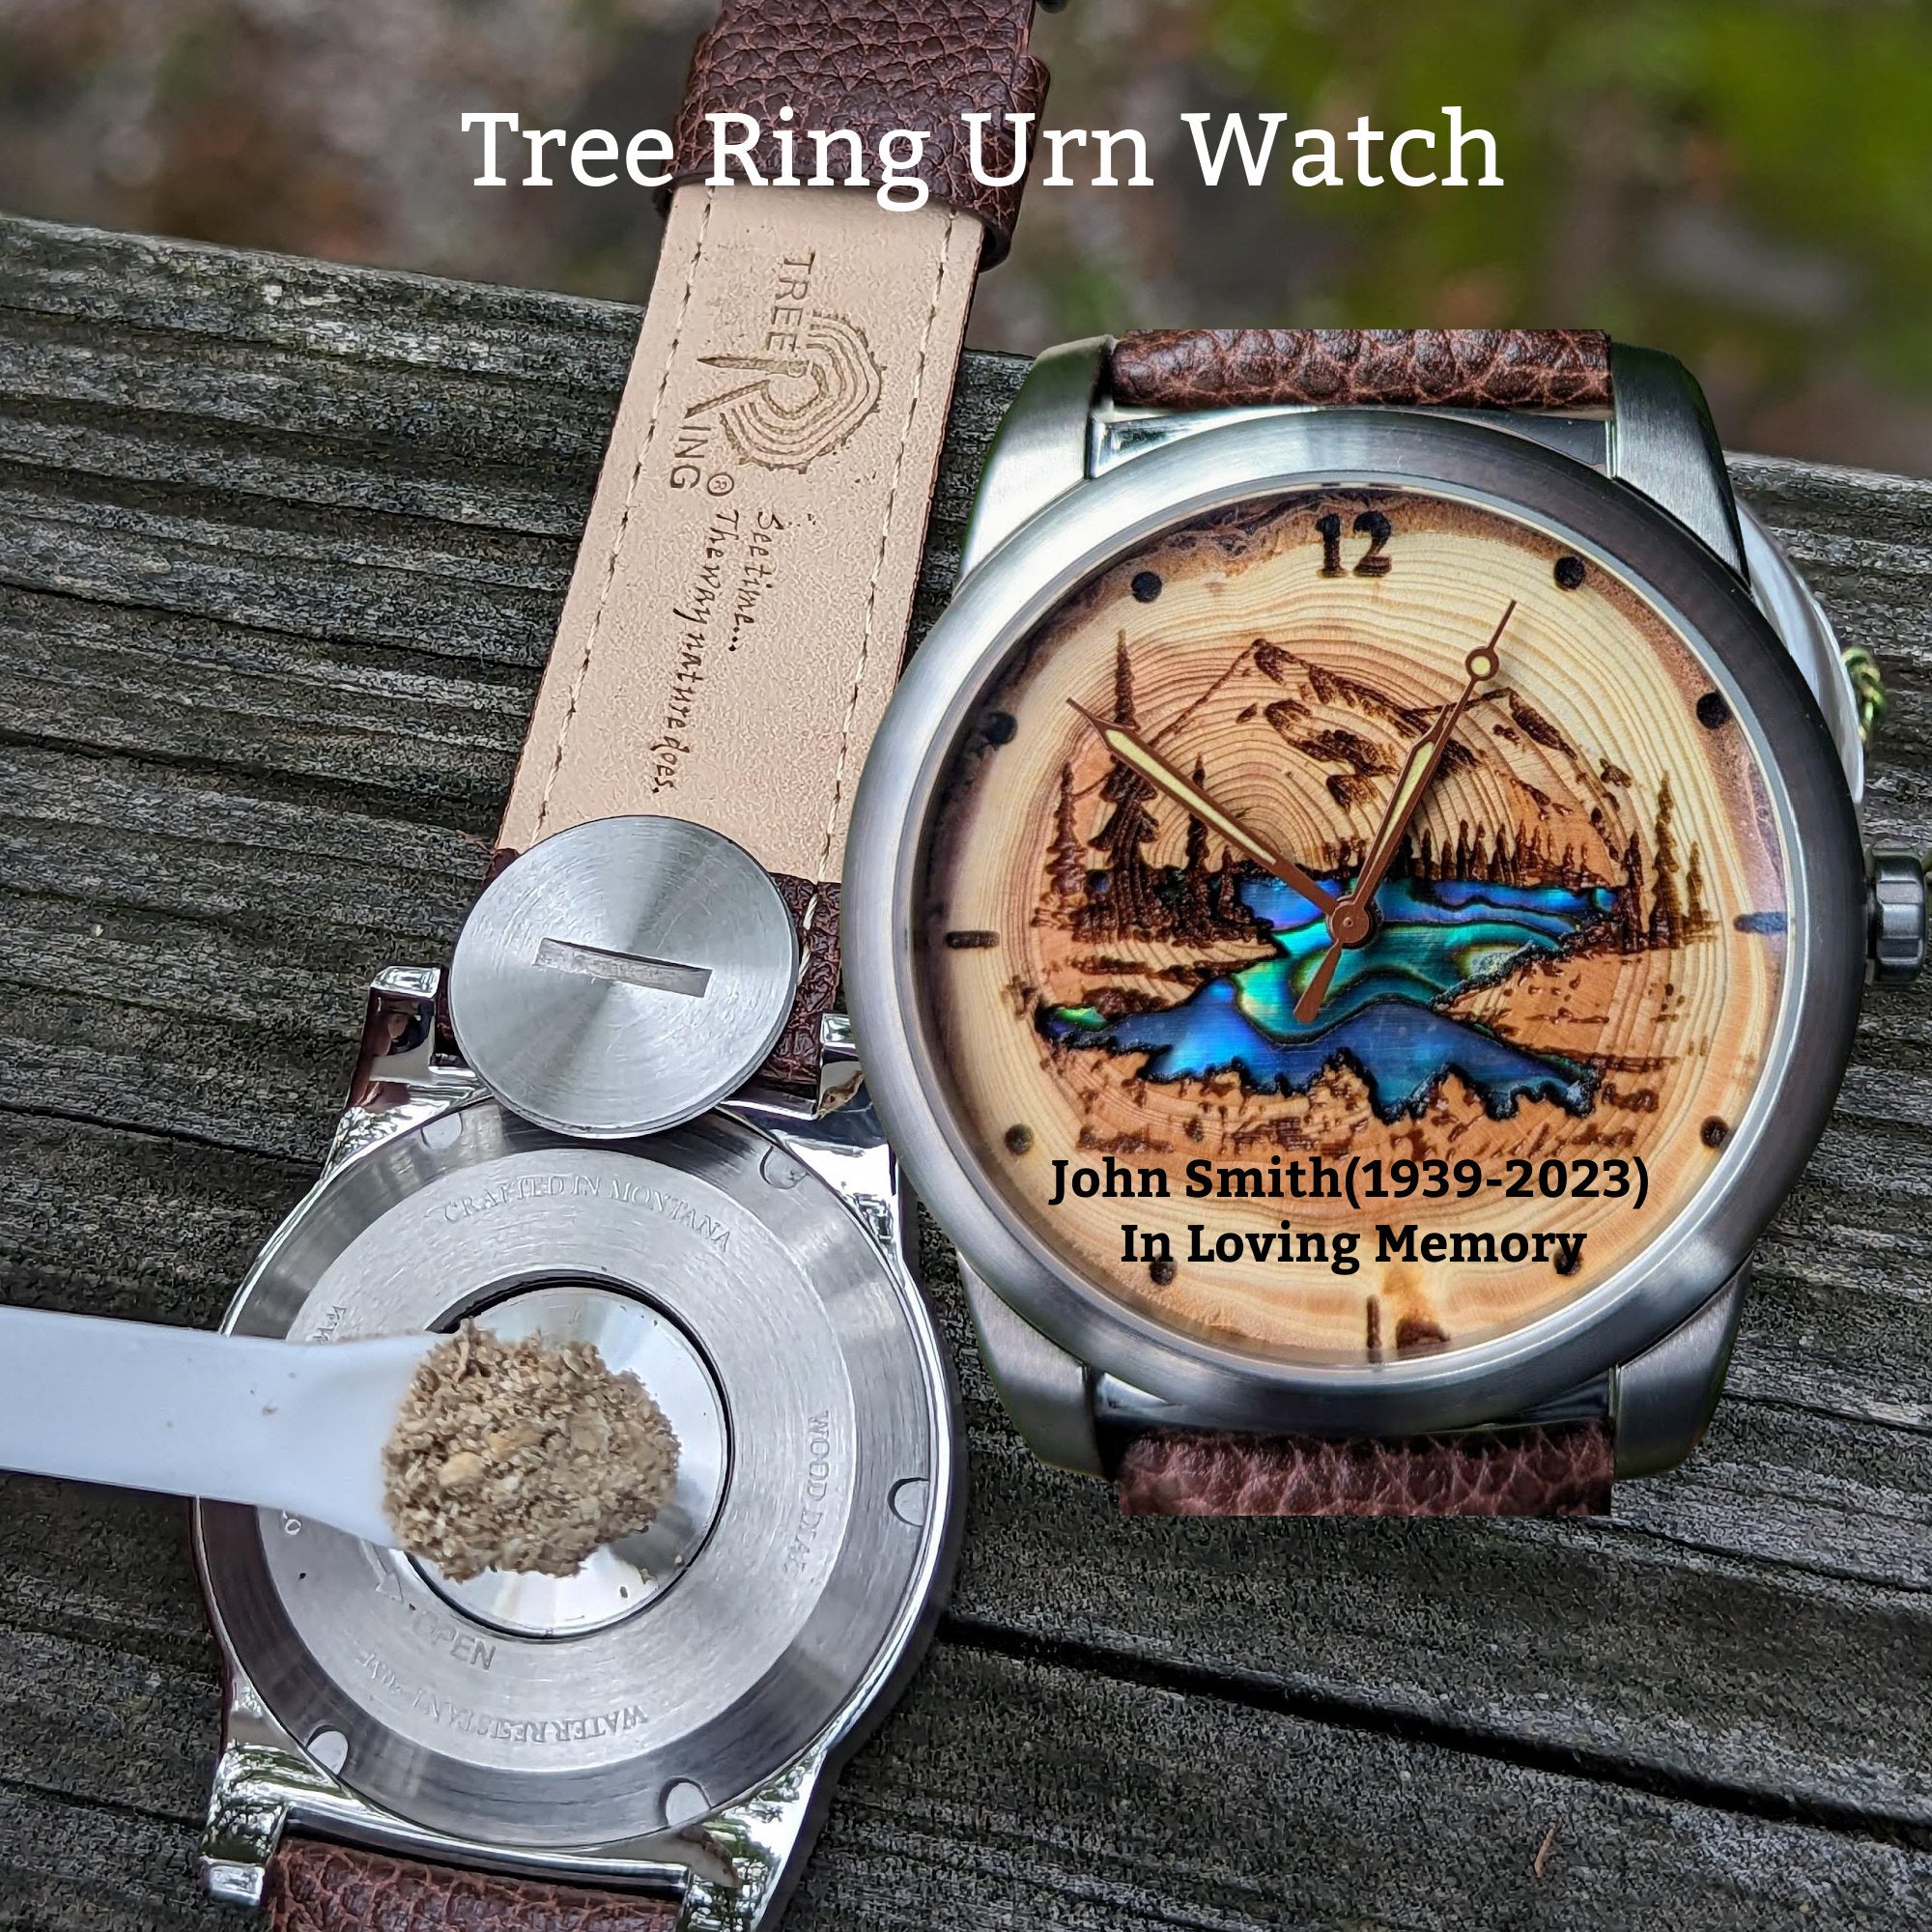 Cremation Jewelry for Men, Man, or Him. Urn Watch Memorial Gift. Cremation Remains Ash Holder. Sympathy or Bereavement Gift